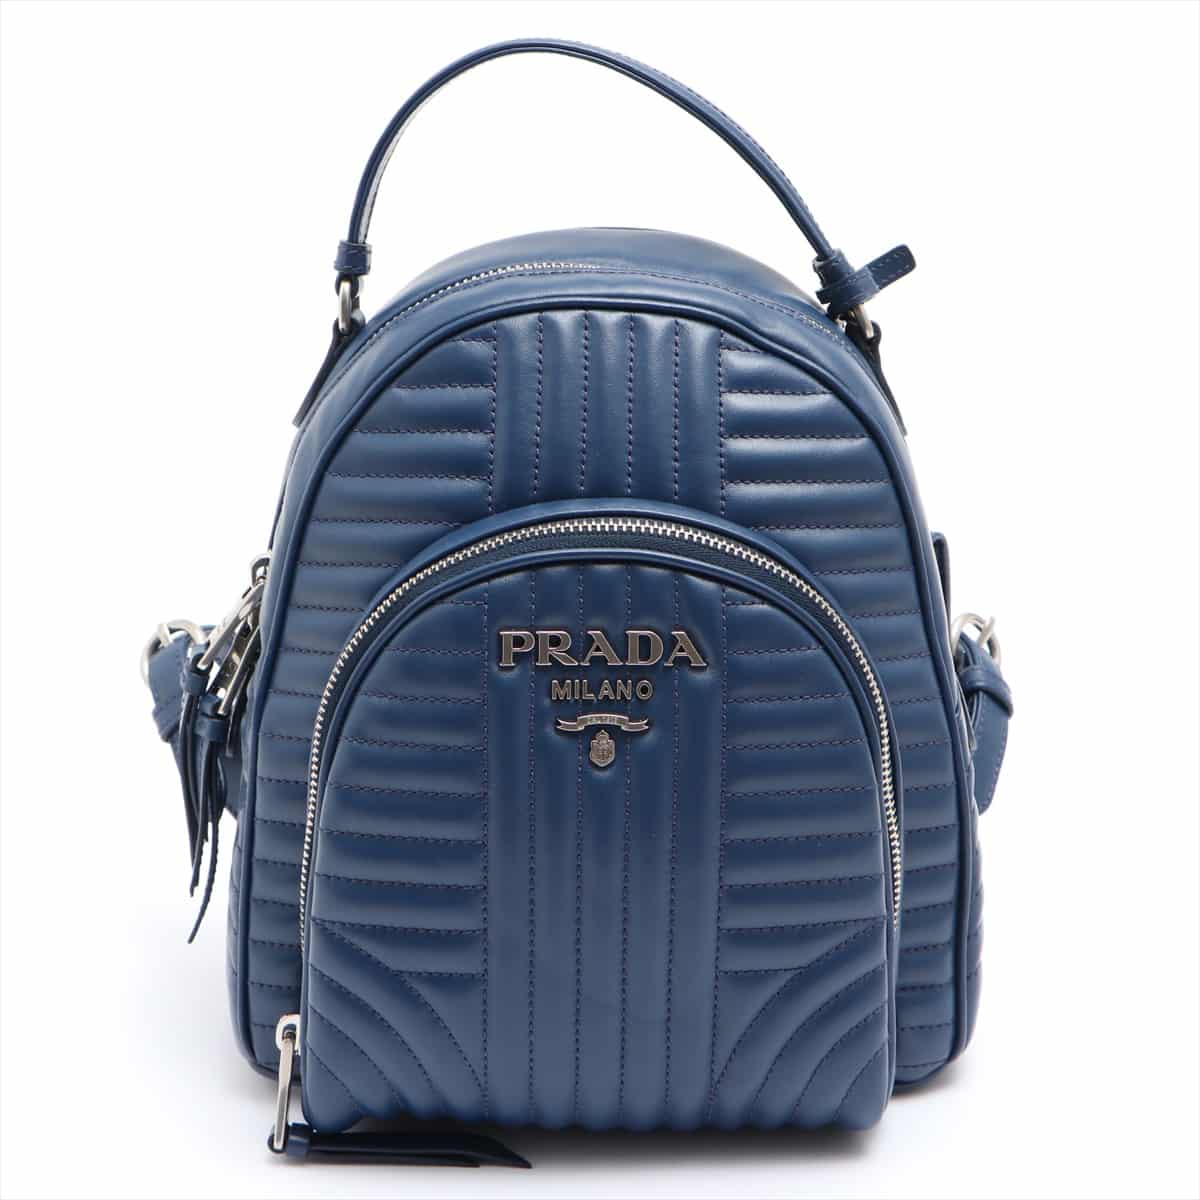 Prada Diagram Leather Backpack Navy blue 1BZ030 open papers